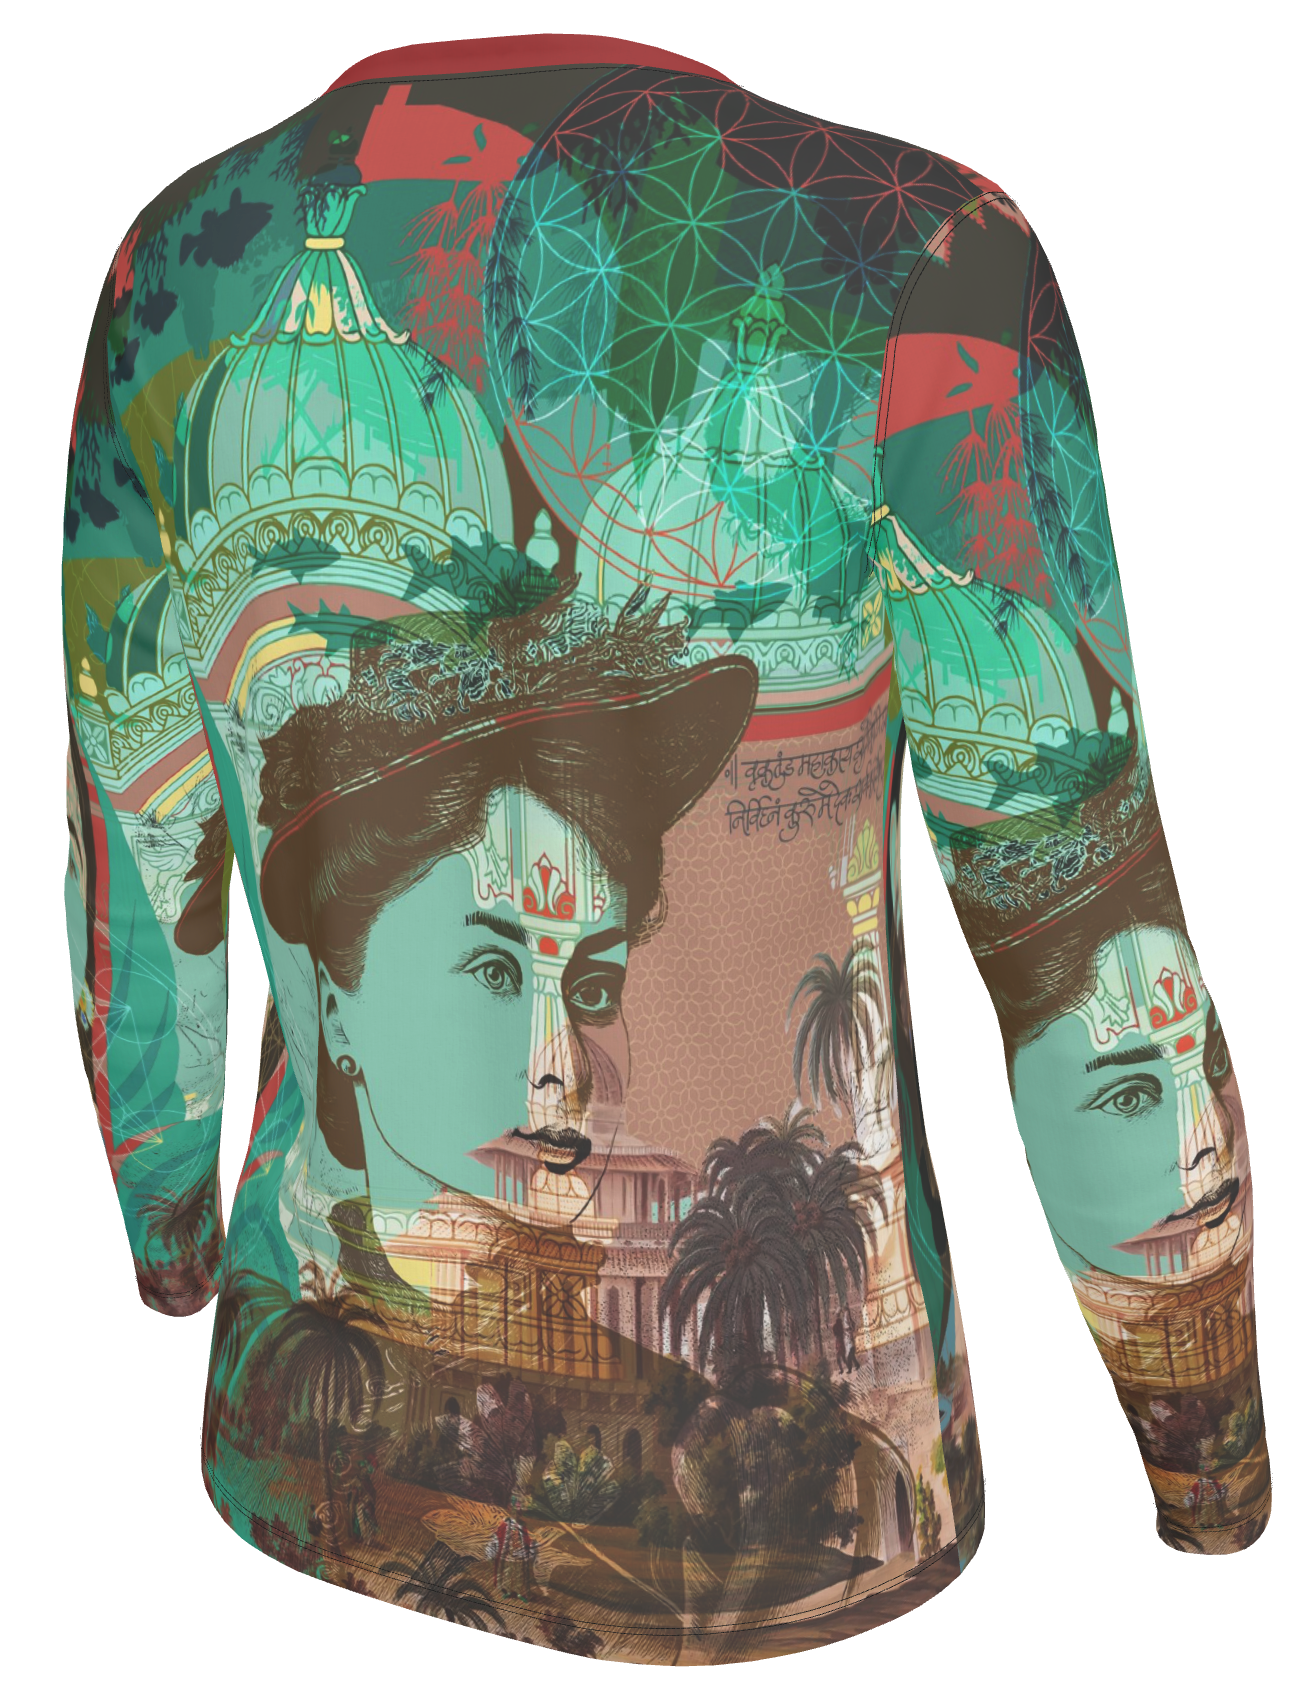 'Sisters of Earth' long sleeved cotton jersey t-shirt